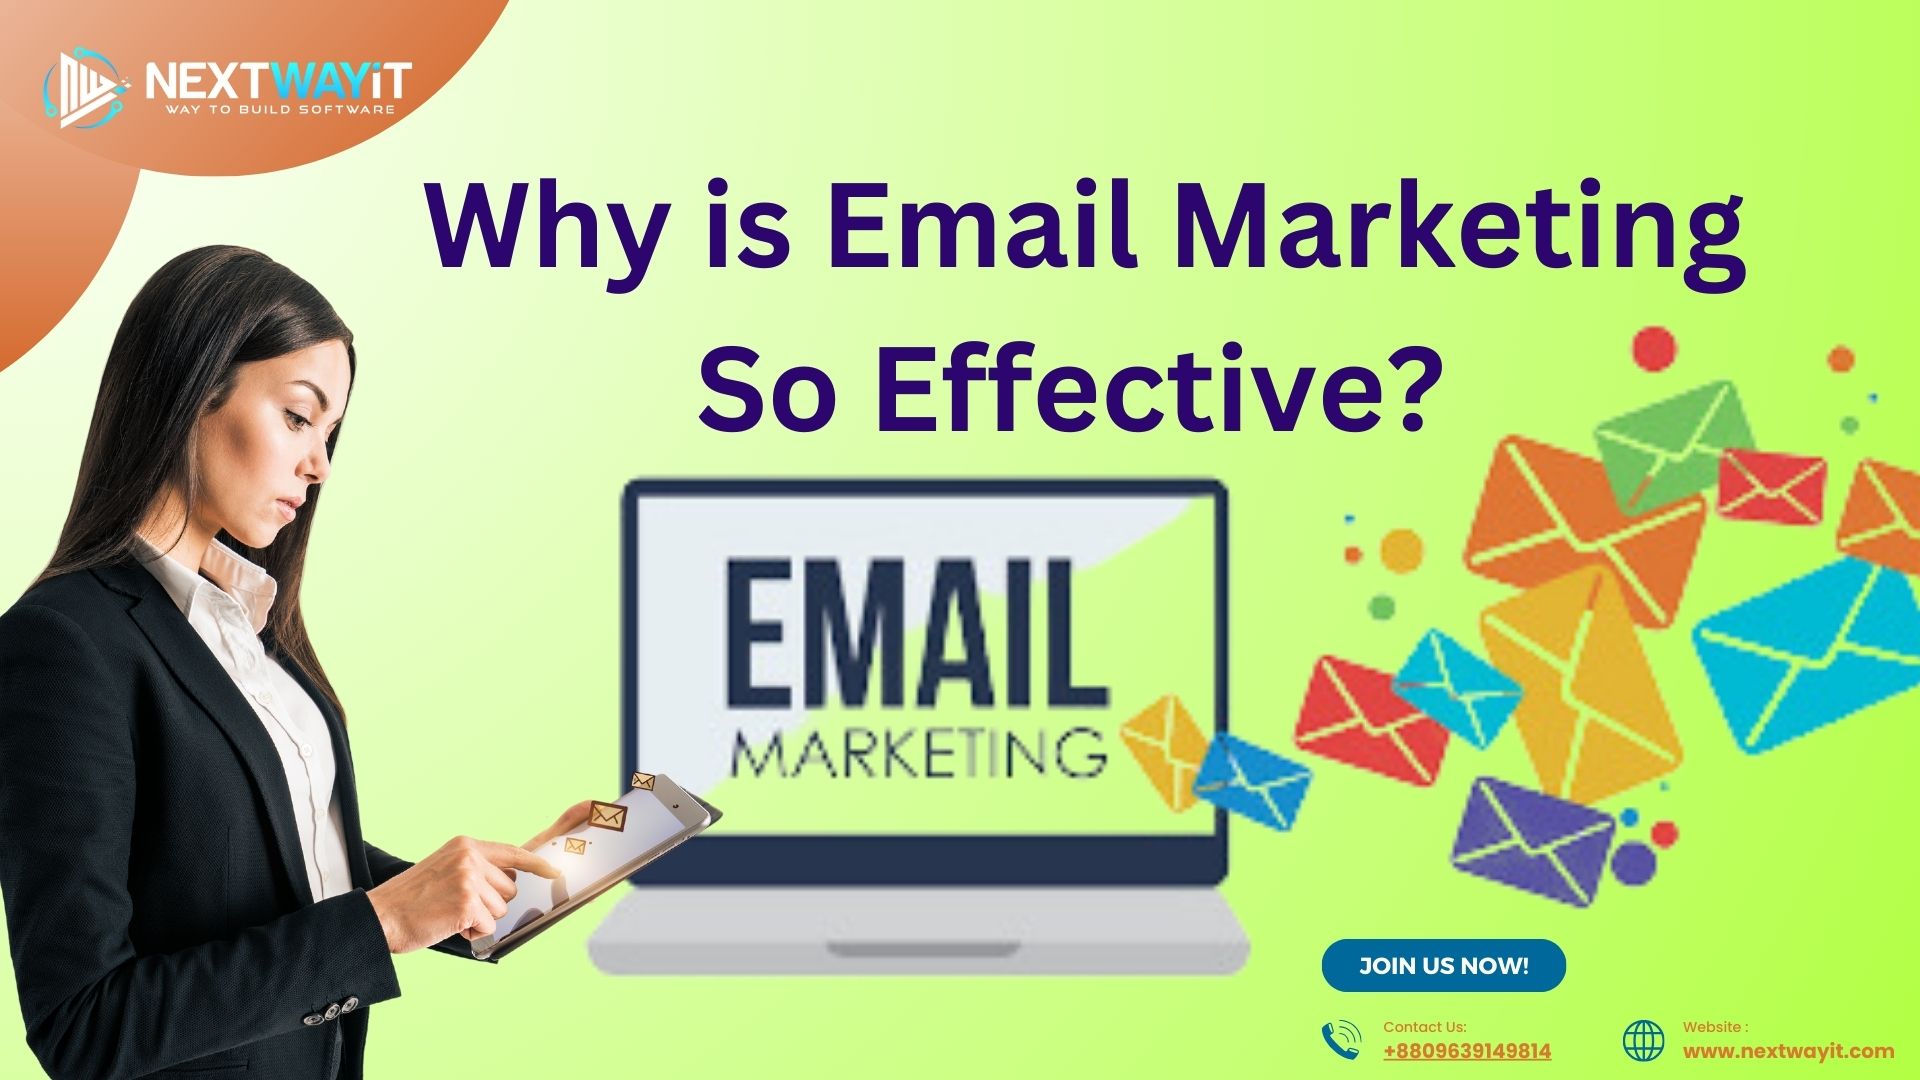 Why is email marketing so effective?